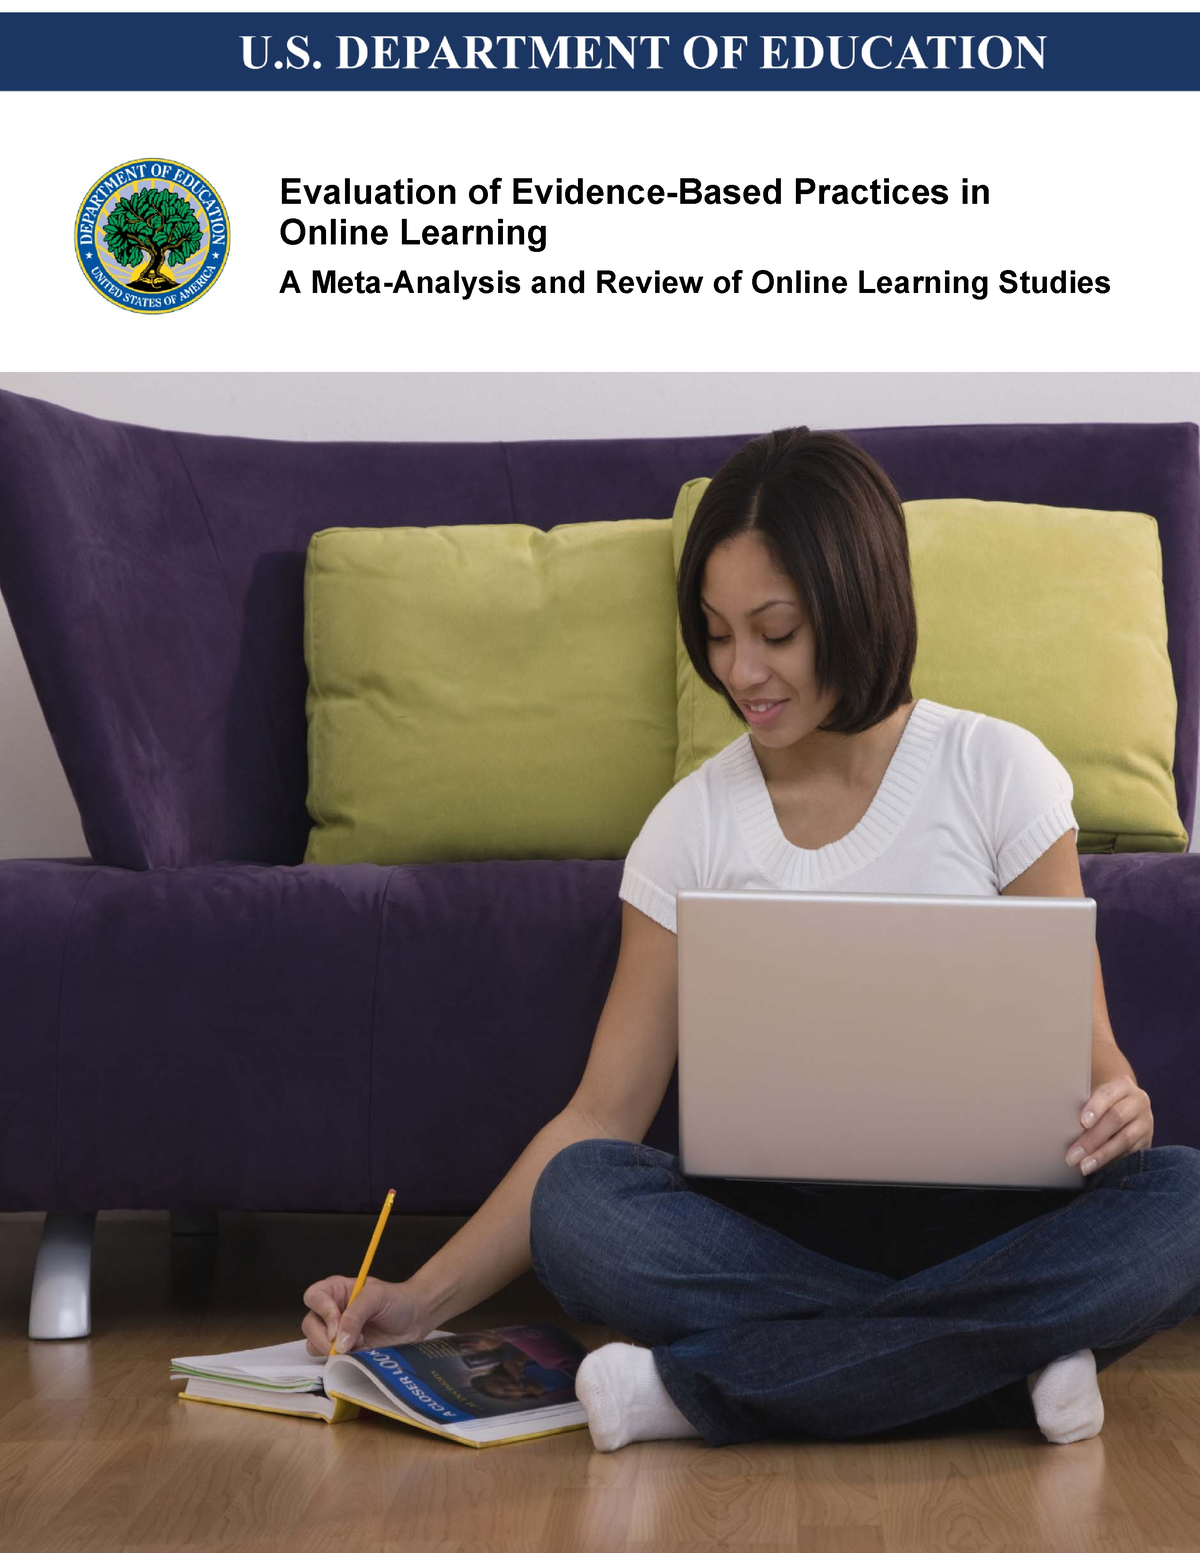 1-3-finalreport-barbara-means-evaluation-of-evidence-based-practices-in-online-learning-a